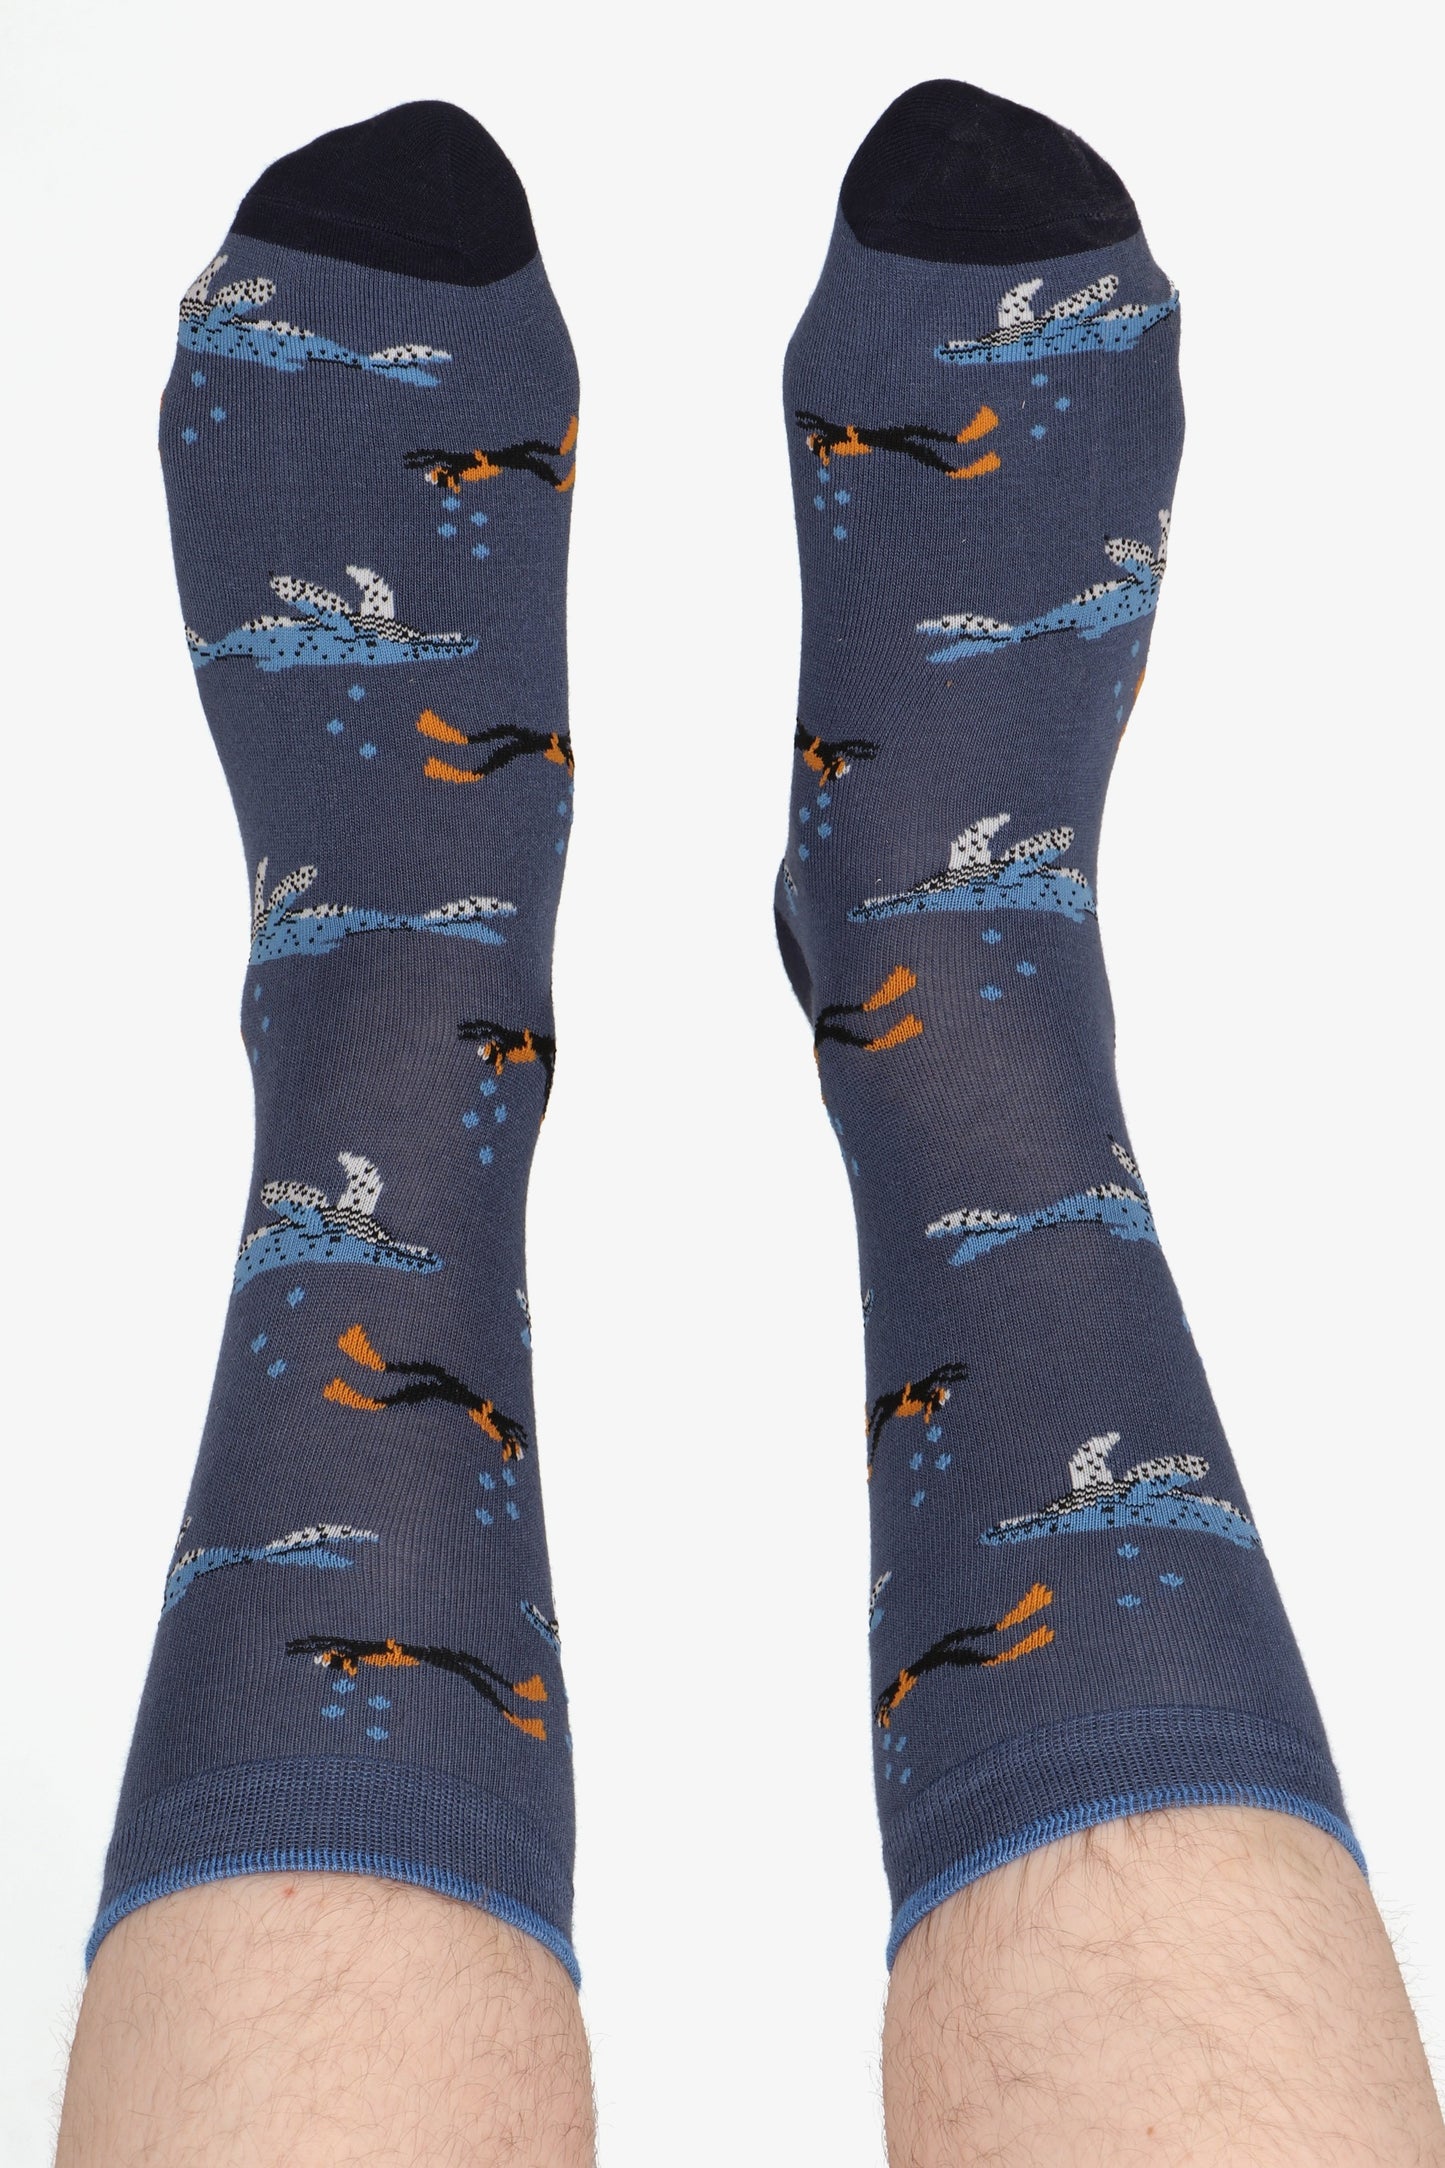 Men's feet wearing tropical fish print socks. Feet are in the air and highlight the contrasting toe detail